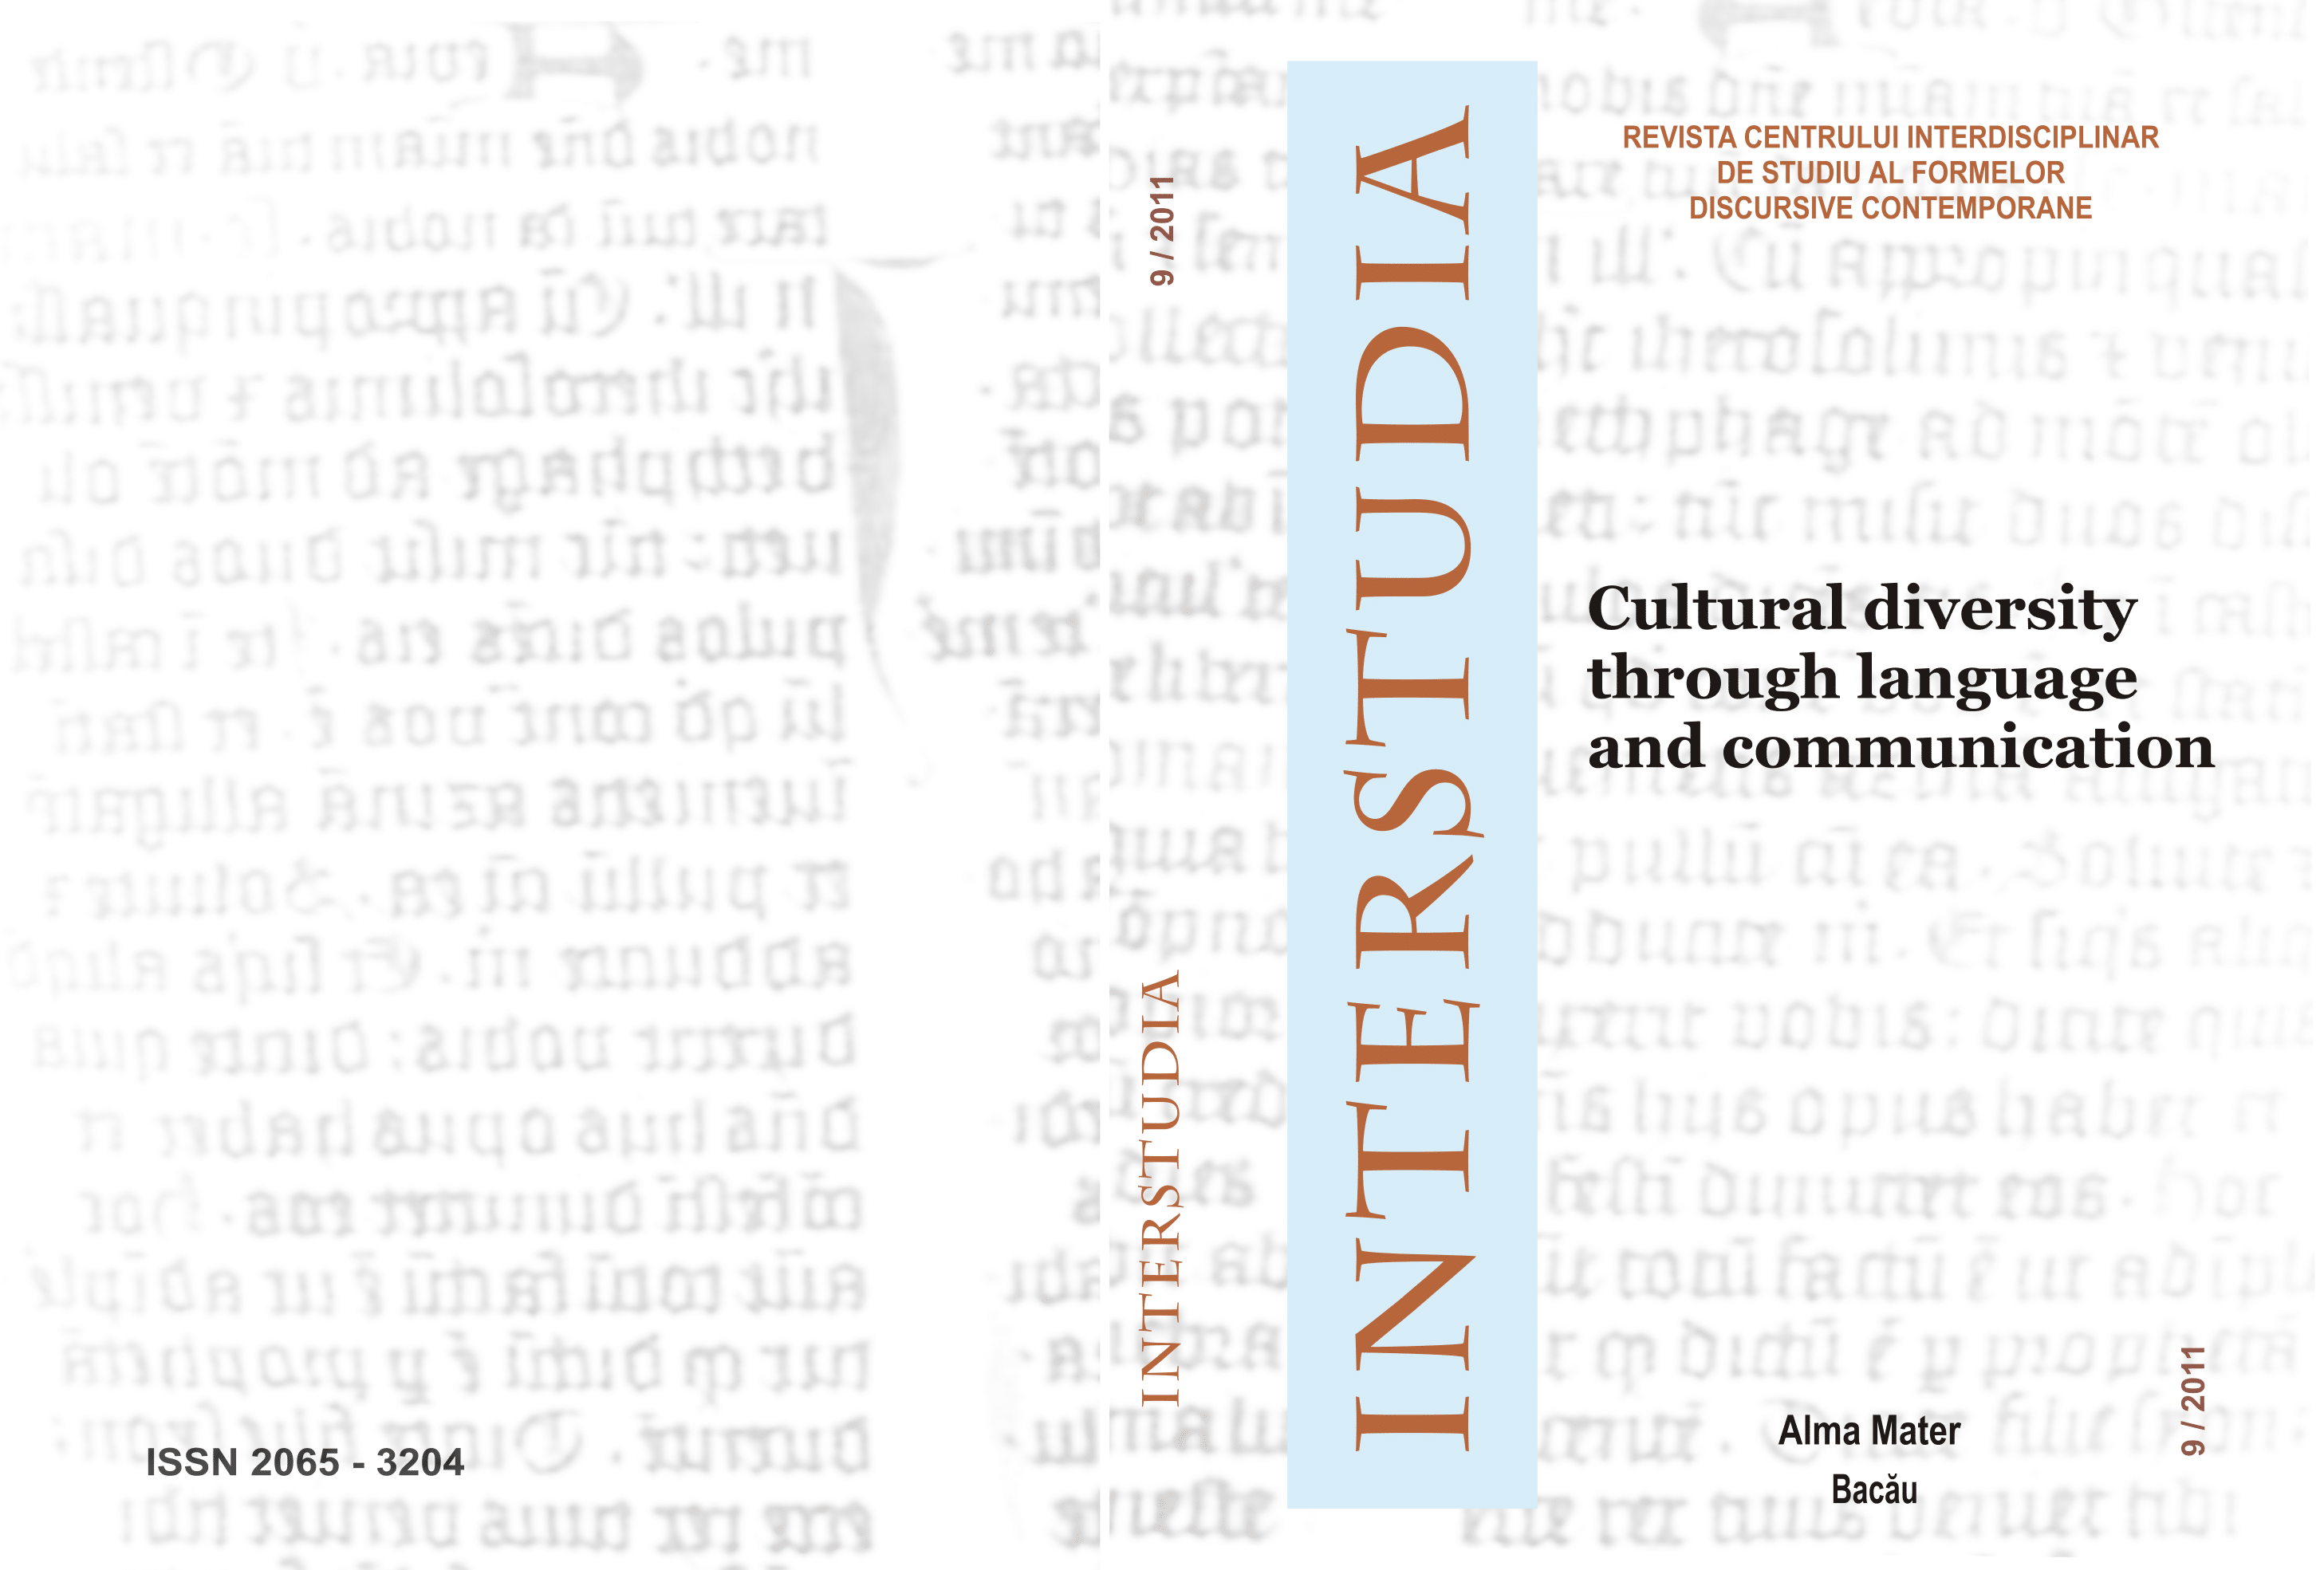 Autobiographies of Intercultural Encounters, or how to deal with intercultural interactions Cover Image